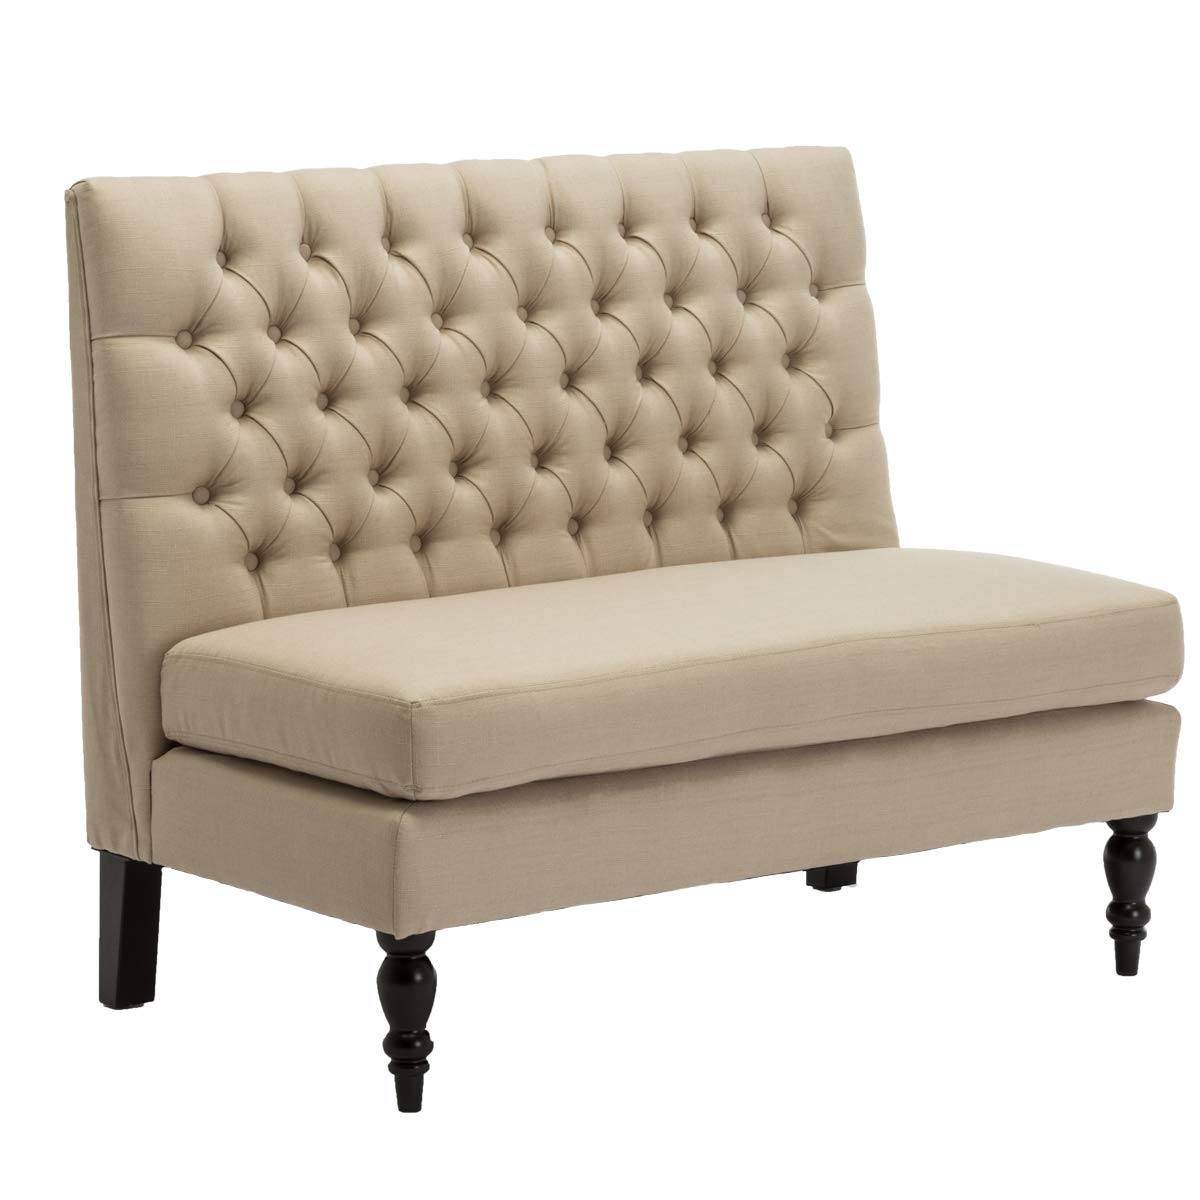 Traveller Location: Andeworld Modern Tufted Button Back Upholstered Loveseat for  Dining Room Hallway or Entryway Seating (Khaki): Kitchen & Dining